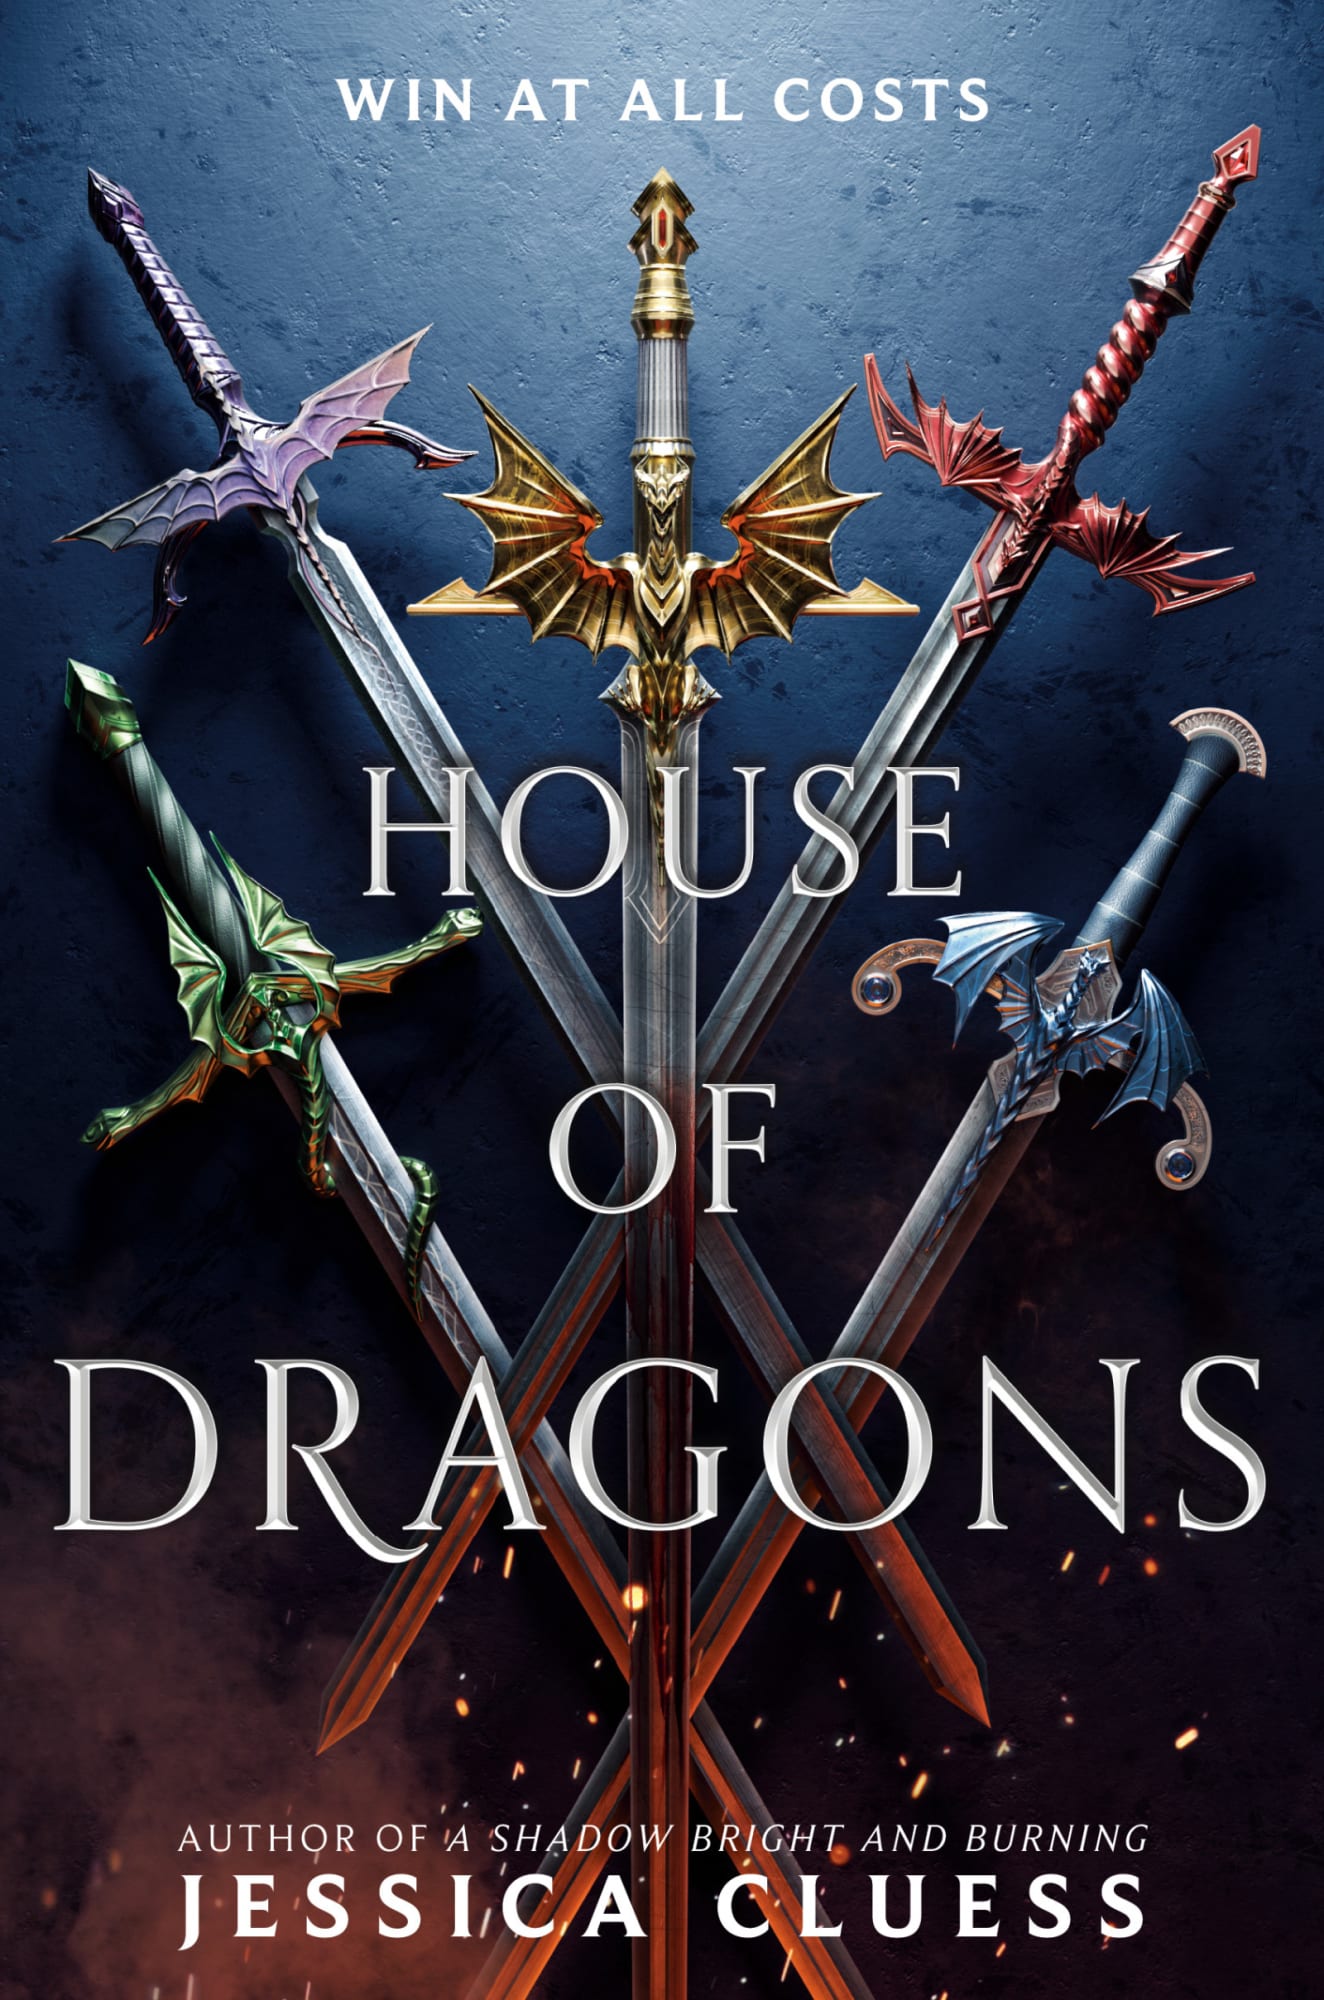 House of Dragons is the start of a magical new mustread fantasy series